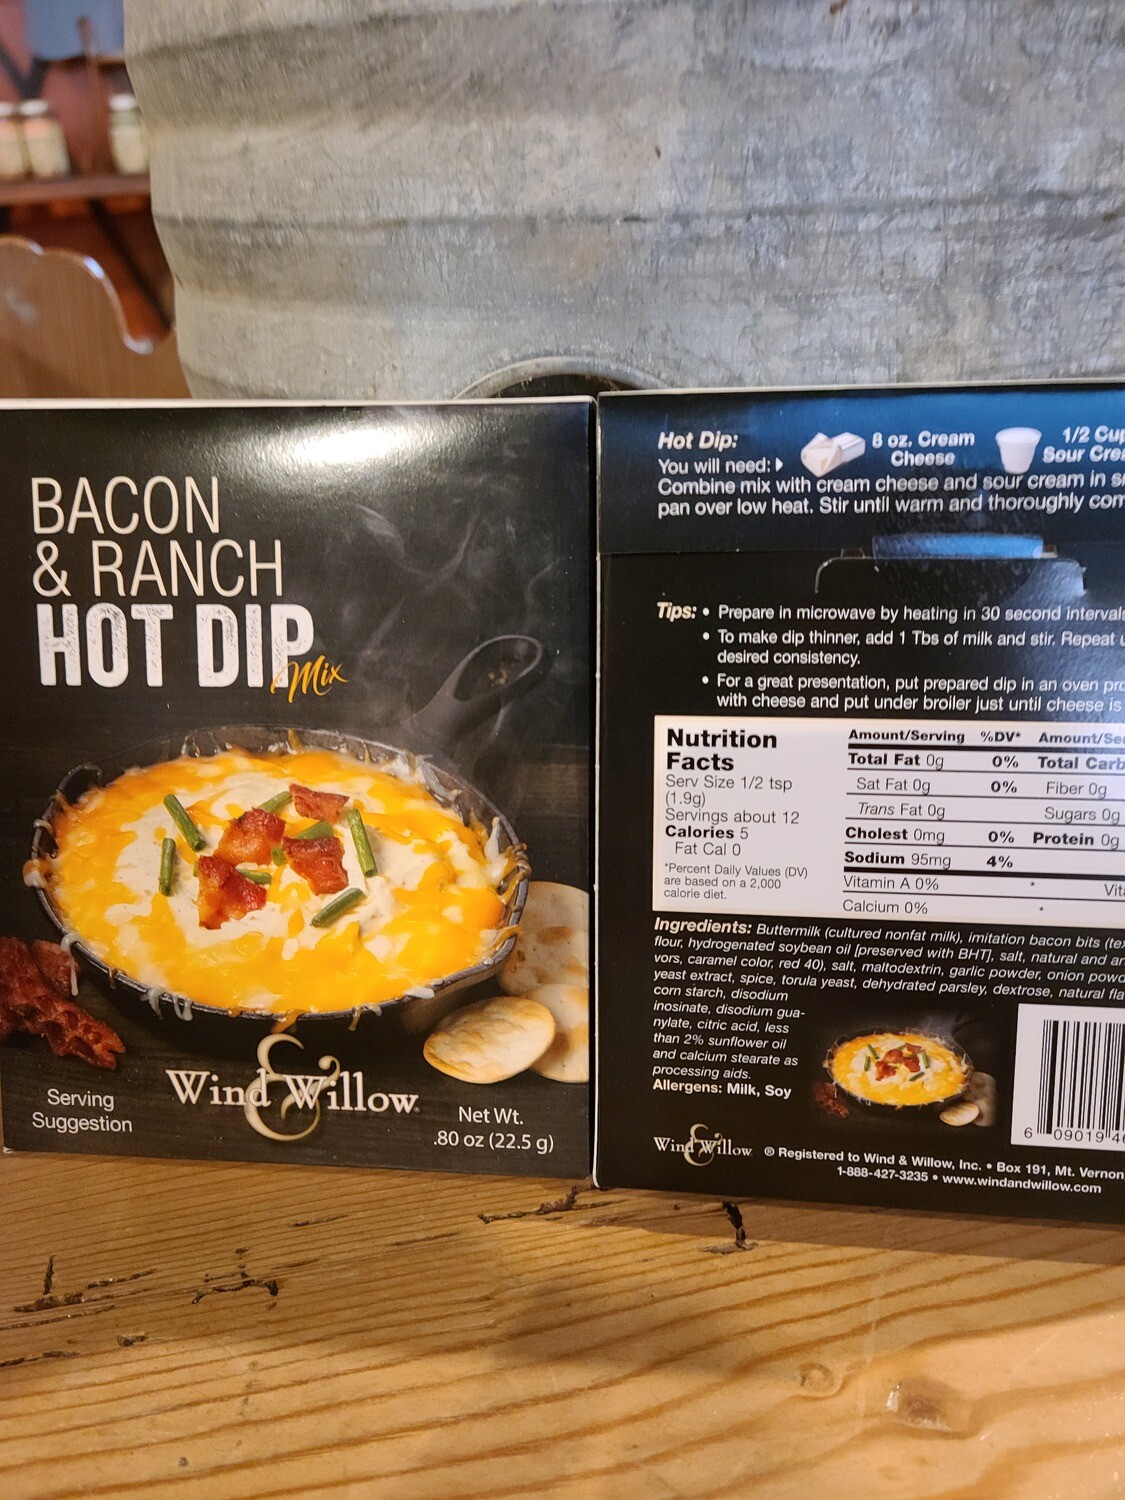 Wind & Willow Bacon & Ranch Hot Dip